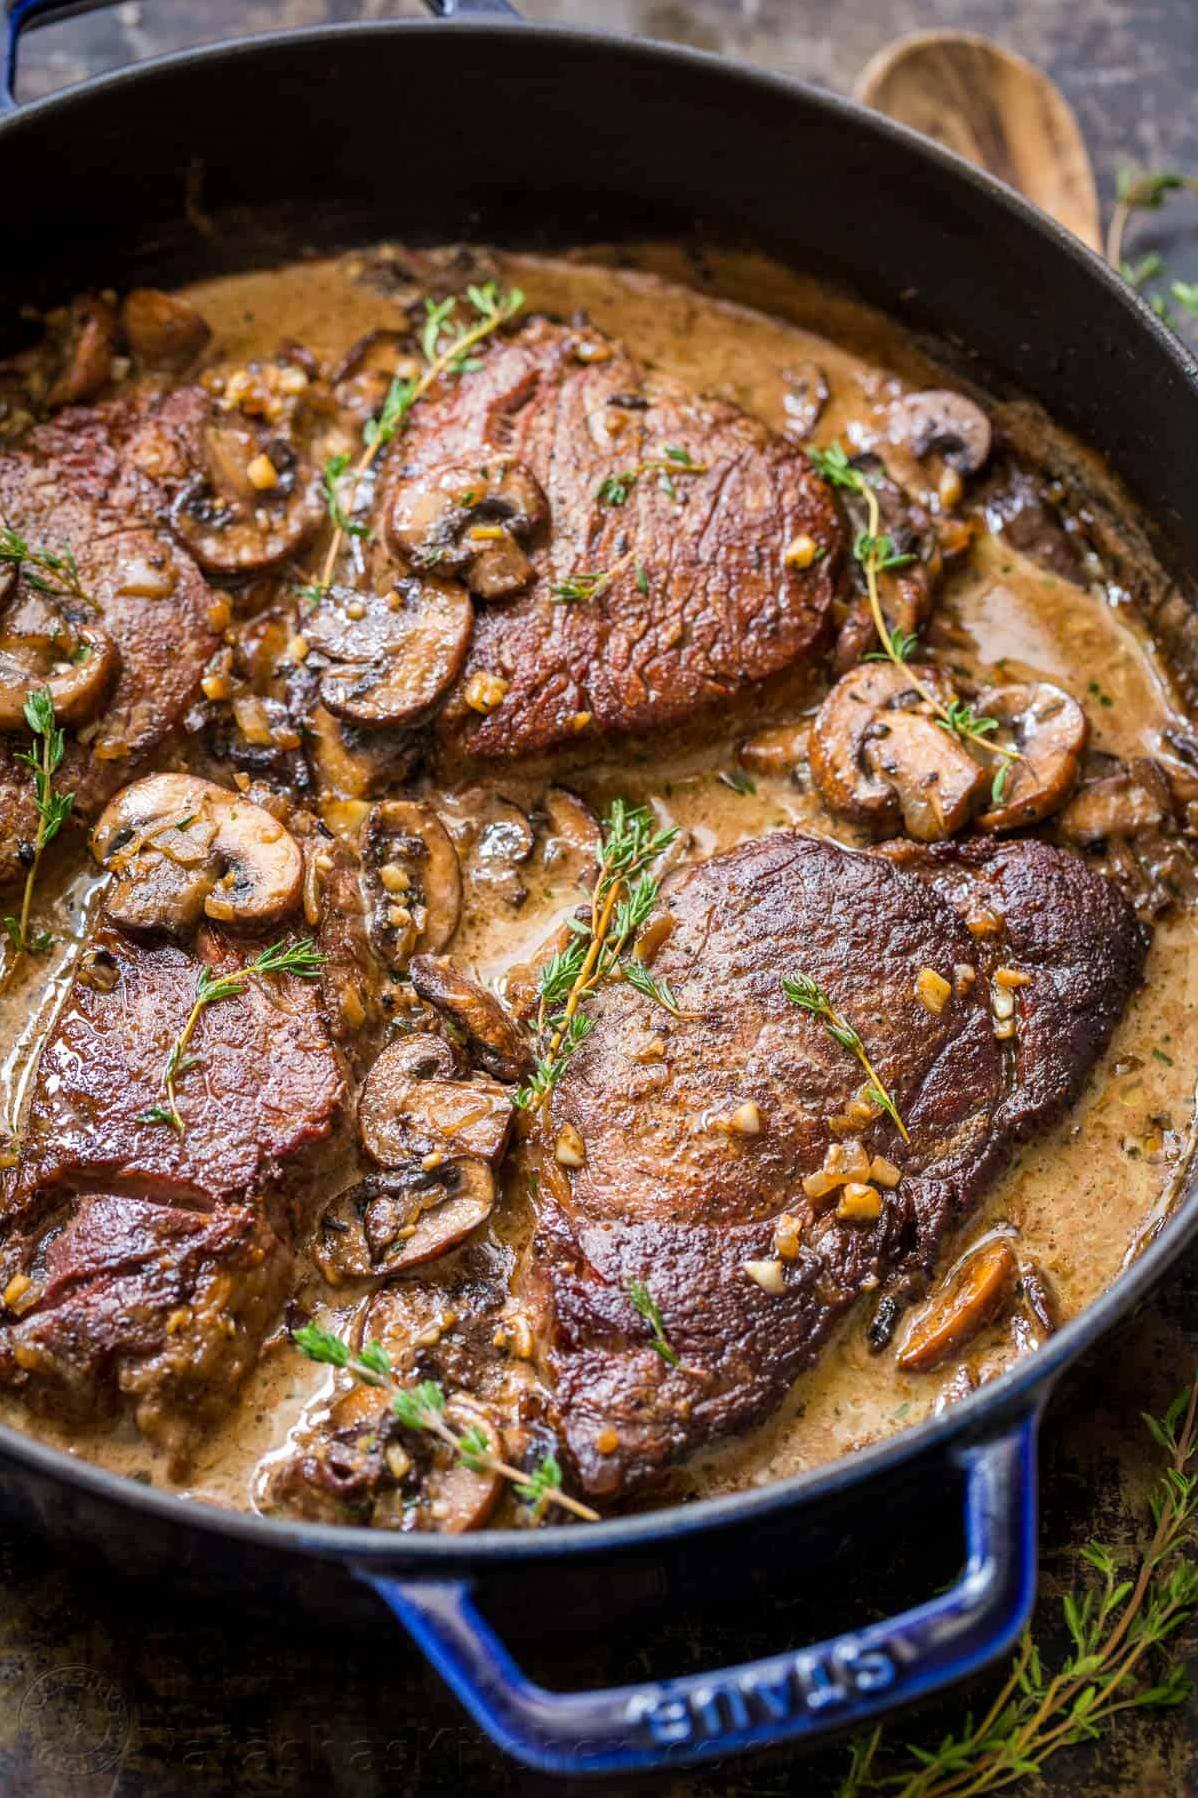  The rich, earthy aroma of the mushroom wine sauce gently smothers the cut of beef and gives it an extra depth of flavor.